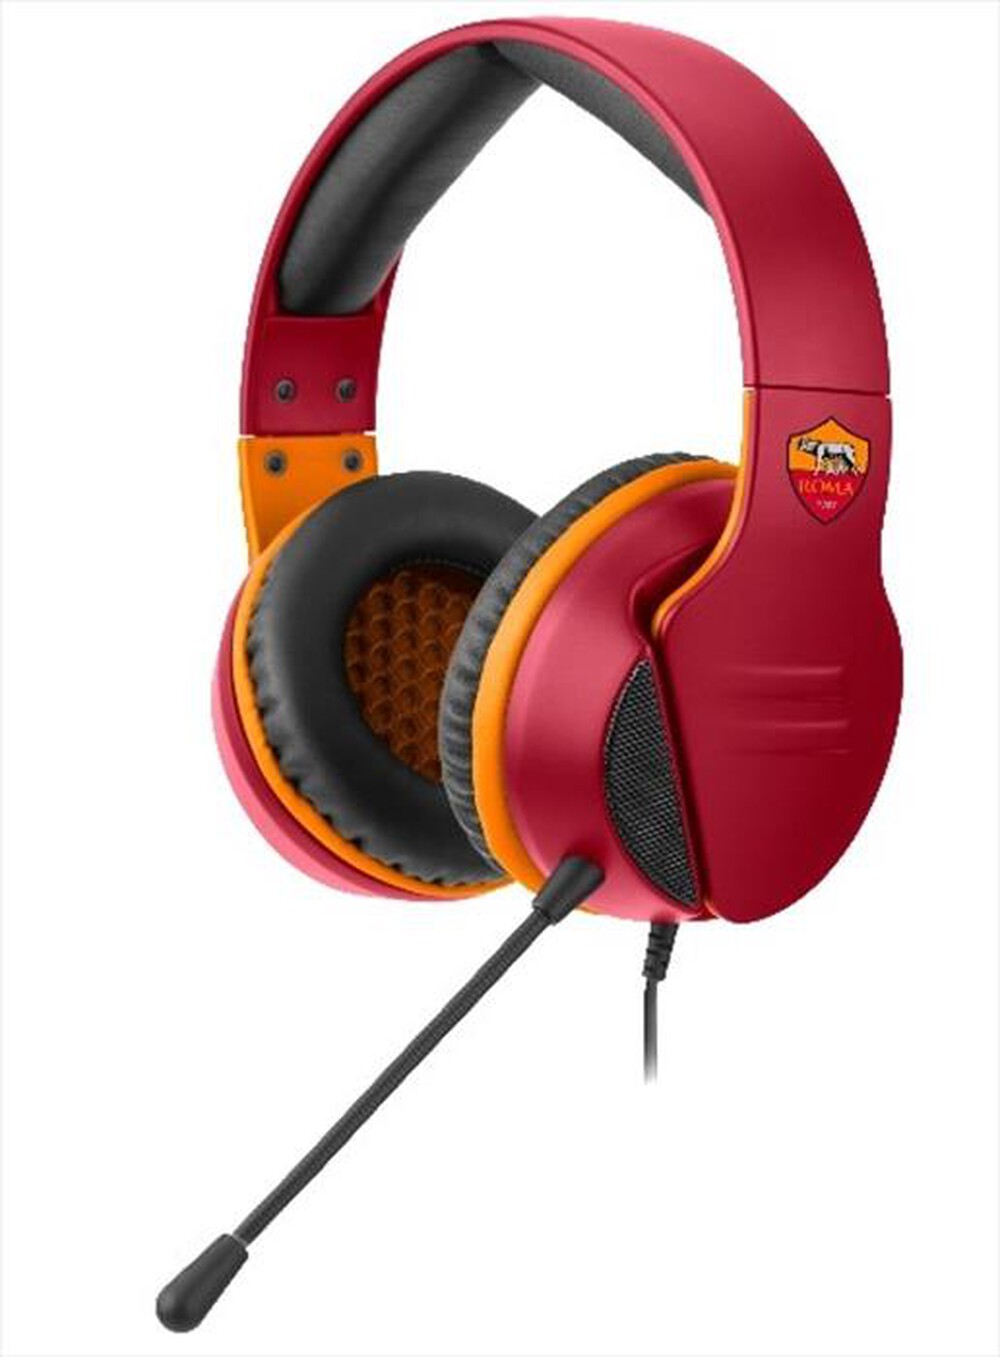 "QUBICK - CUFFIE GAMING STEREO AS ROMA"